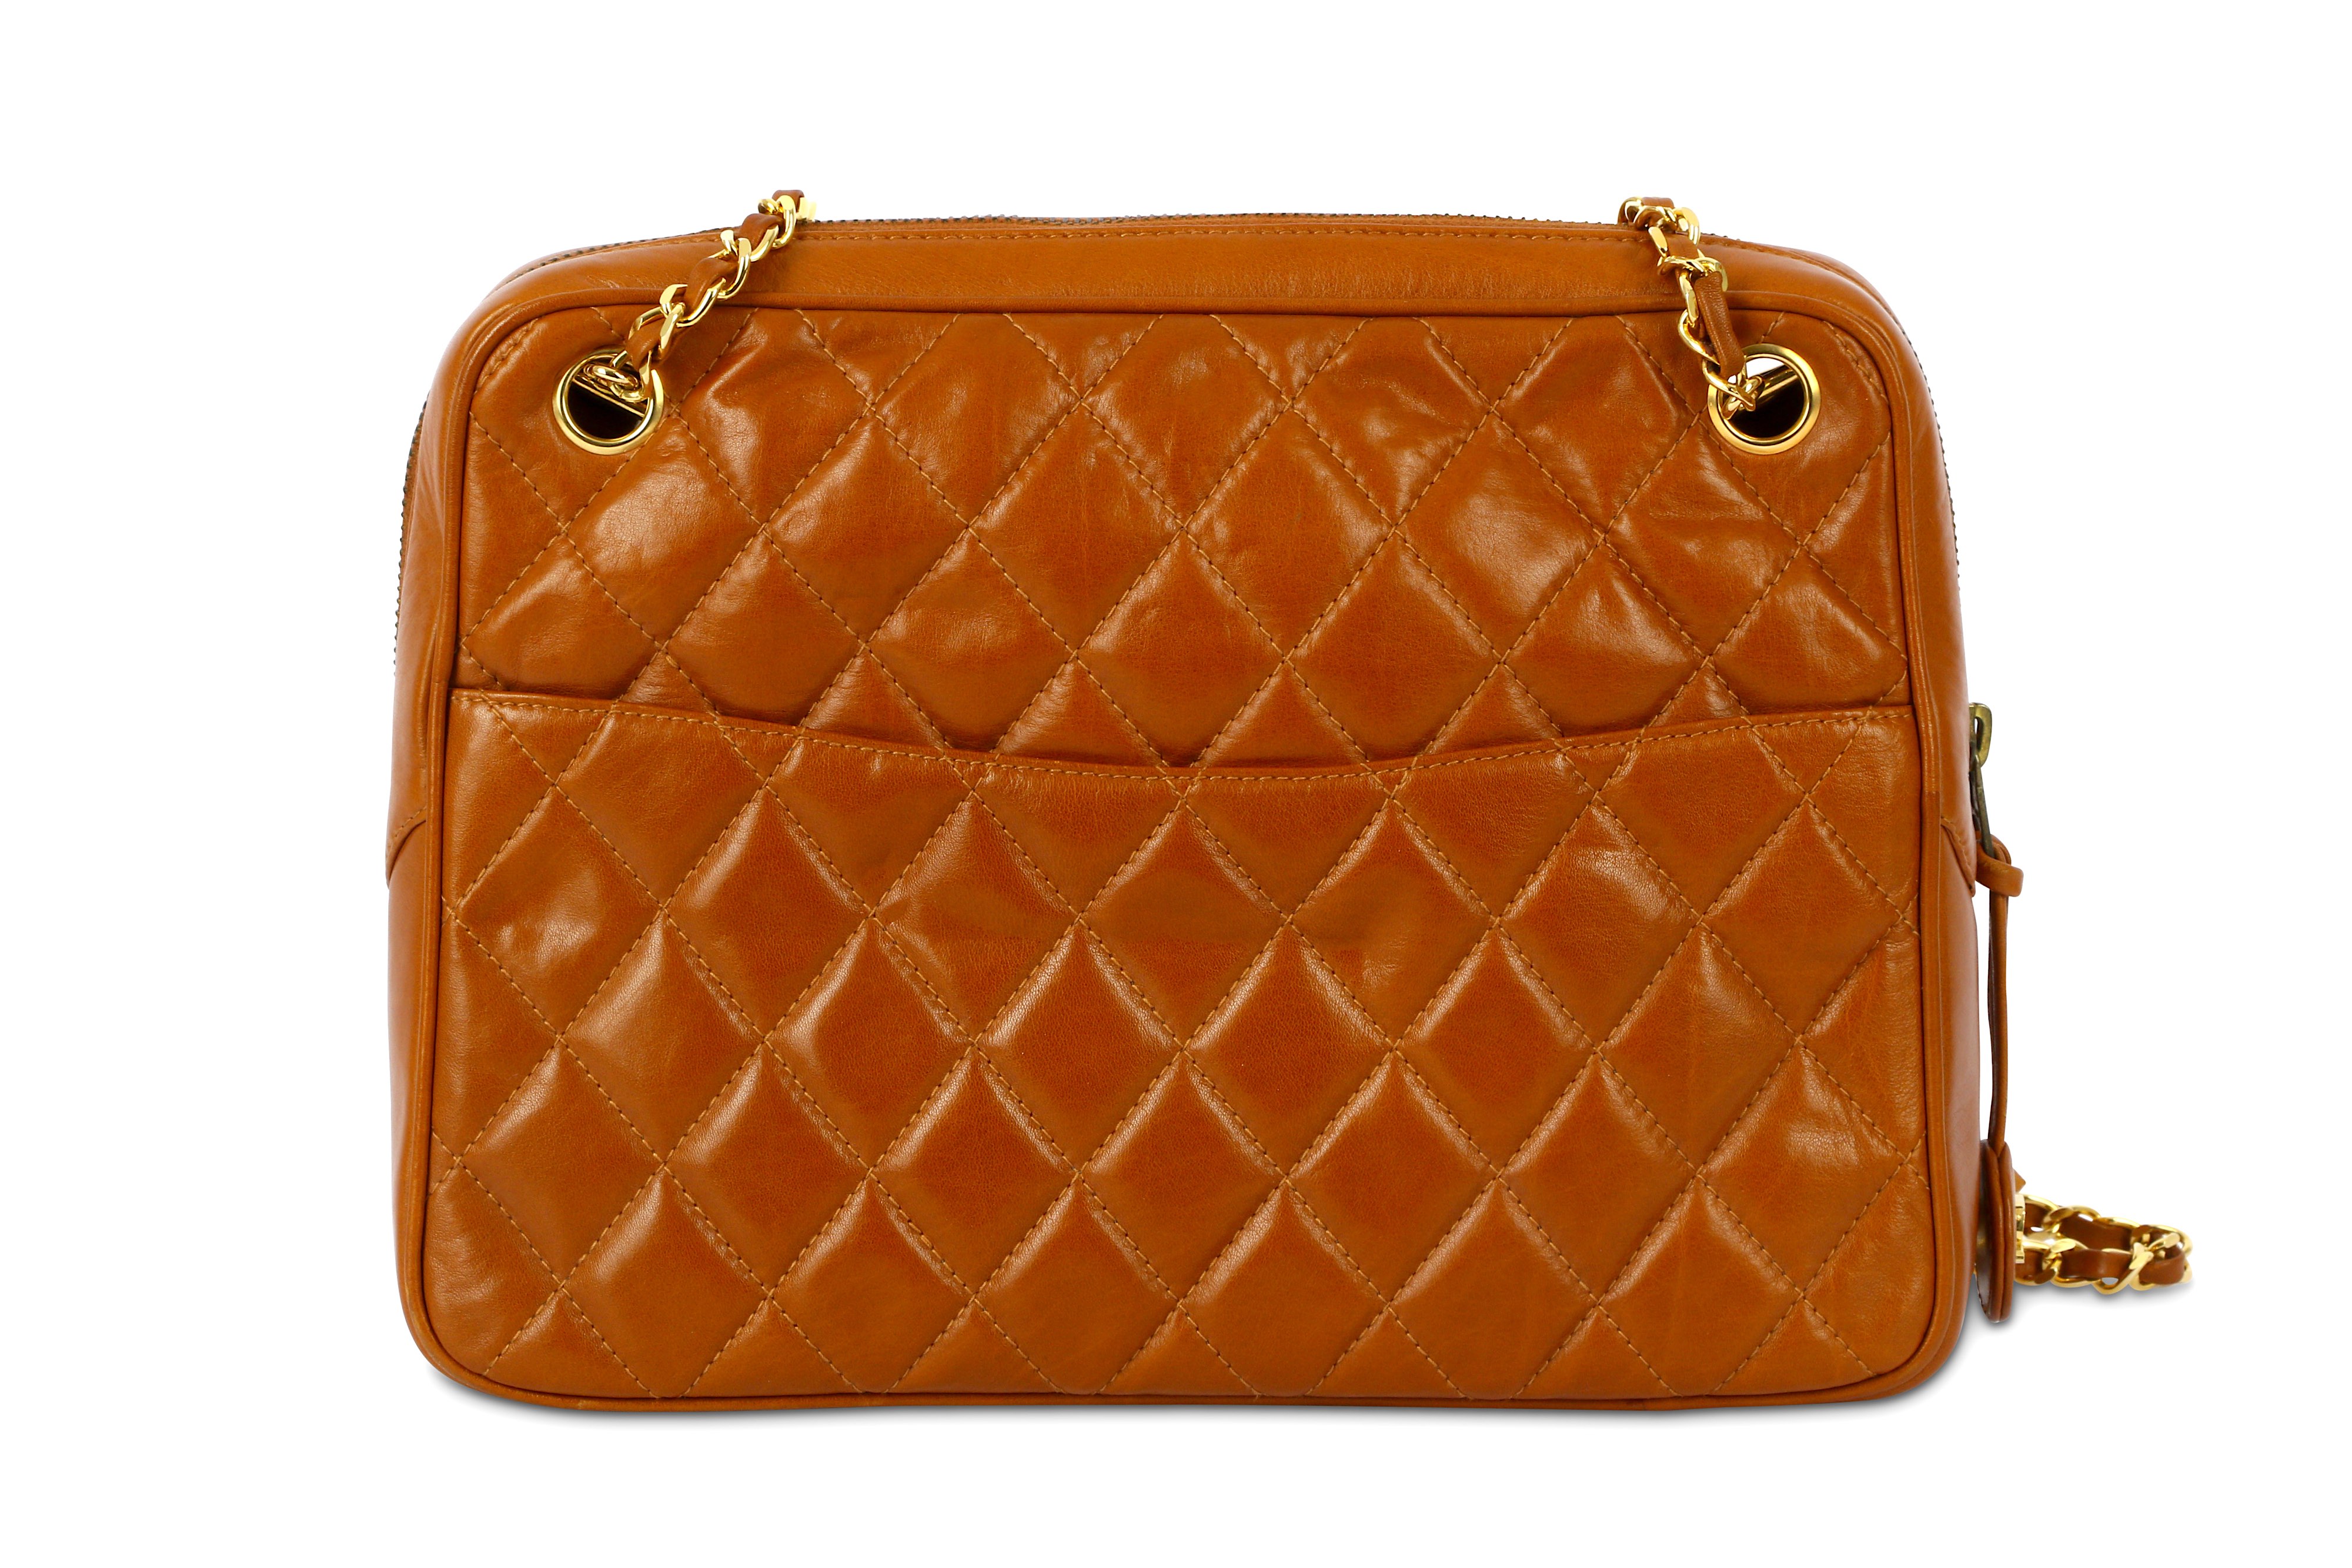 Chanel Cognac Brown Shoulder Bag, c. 1989-91, quilted lambskin with ...